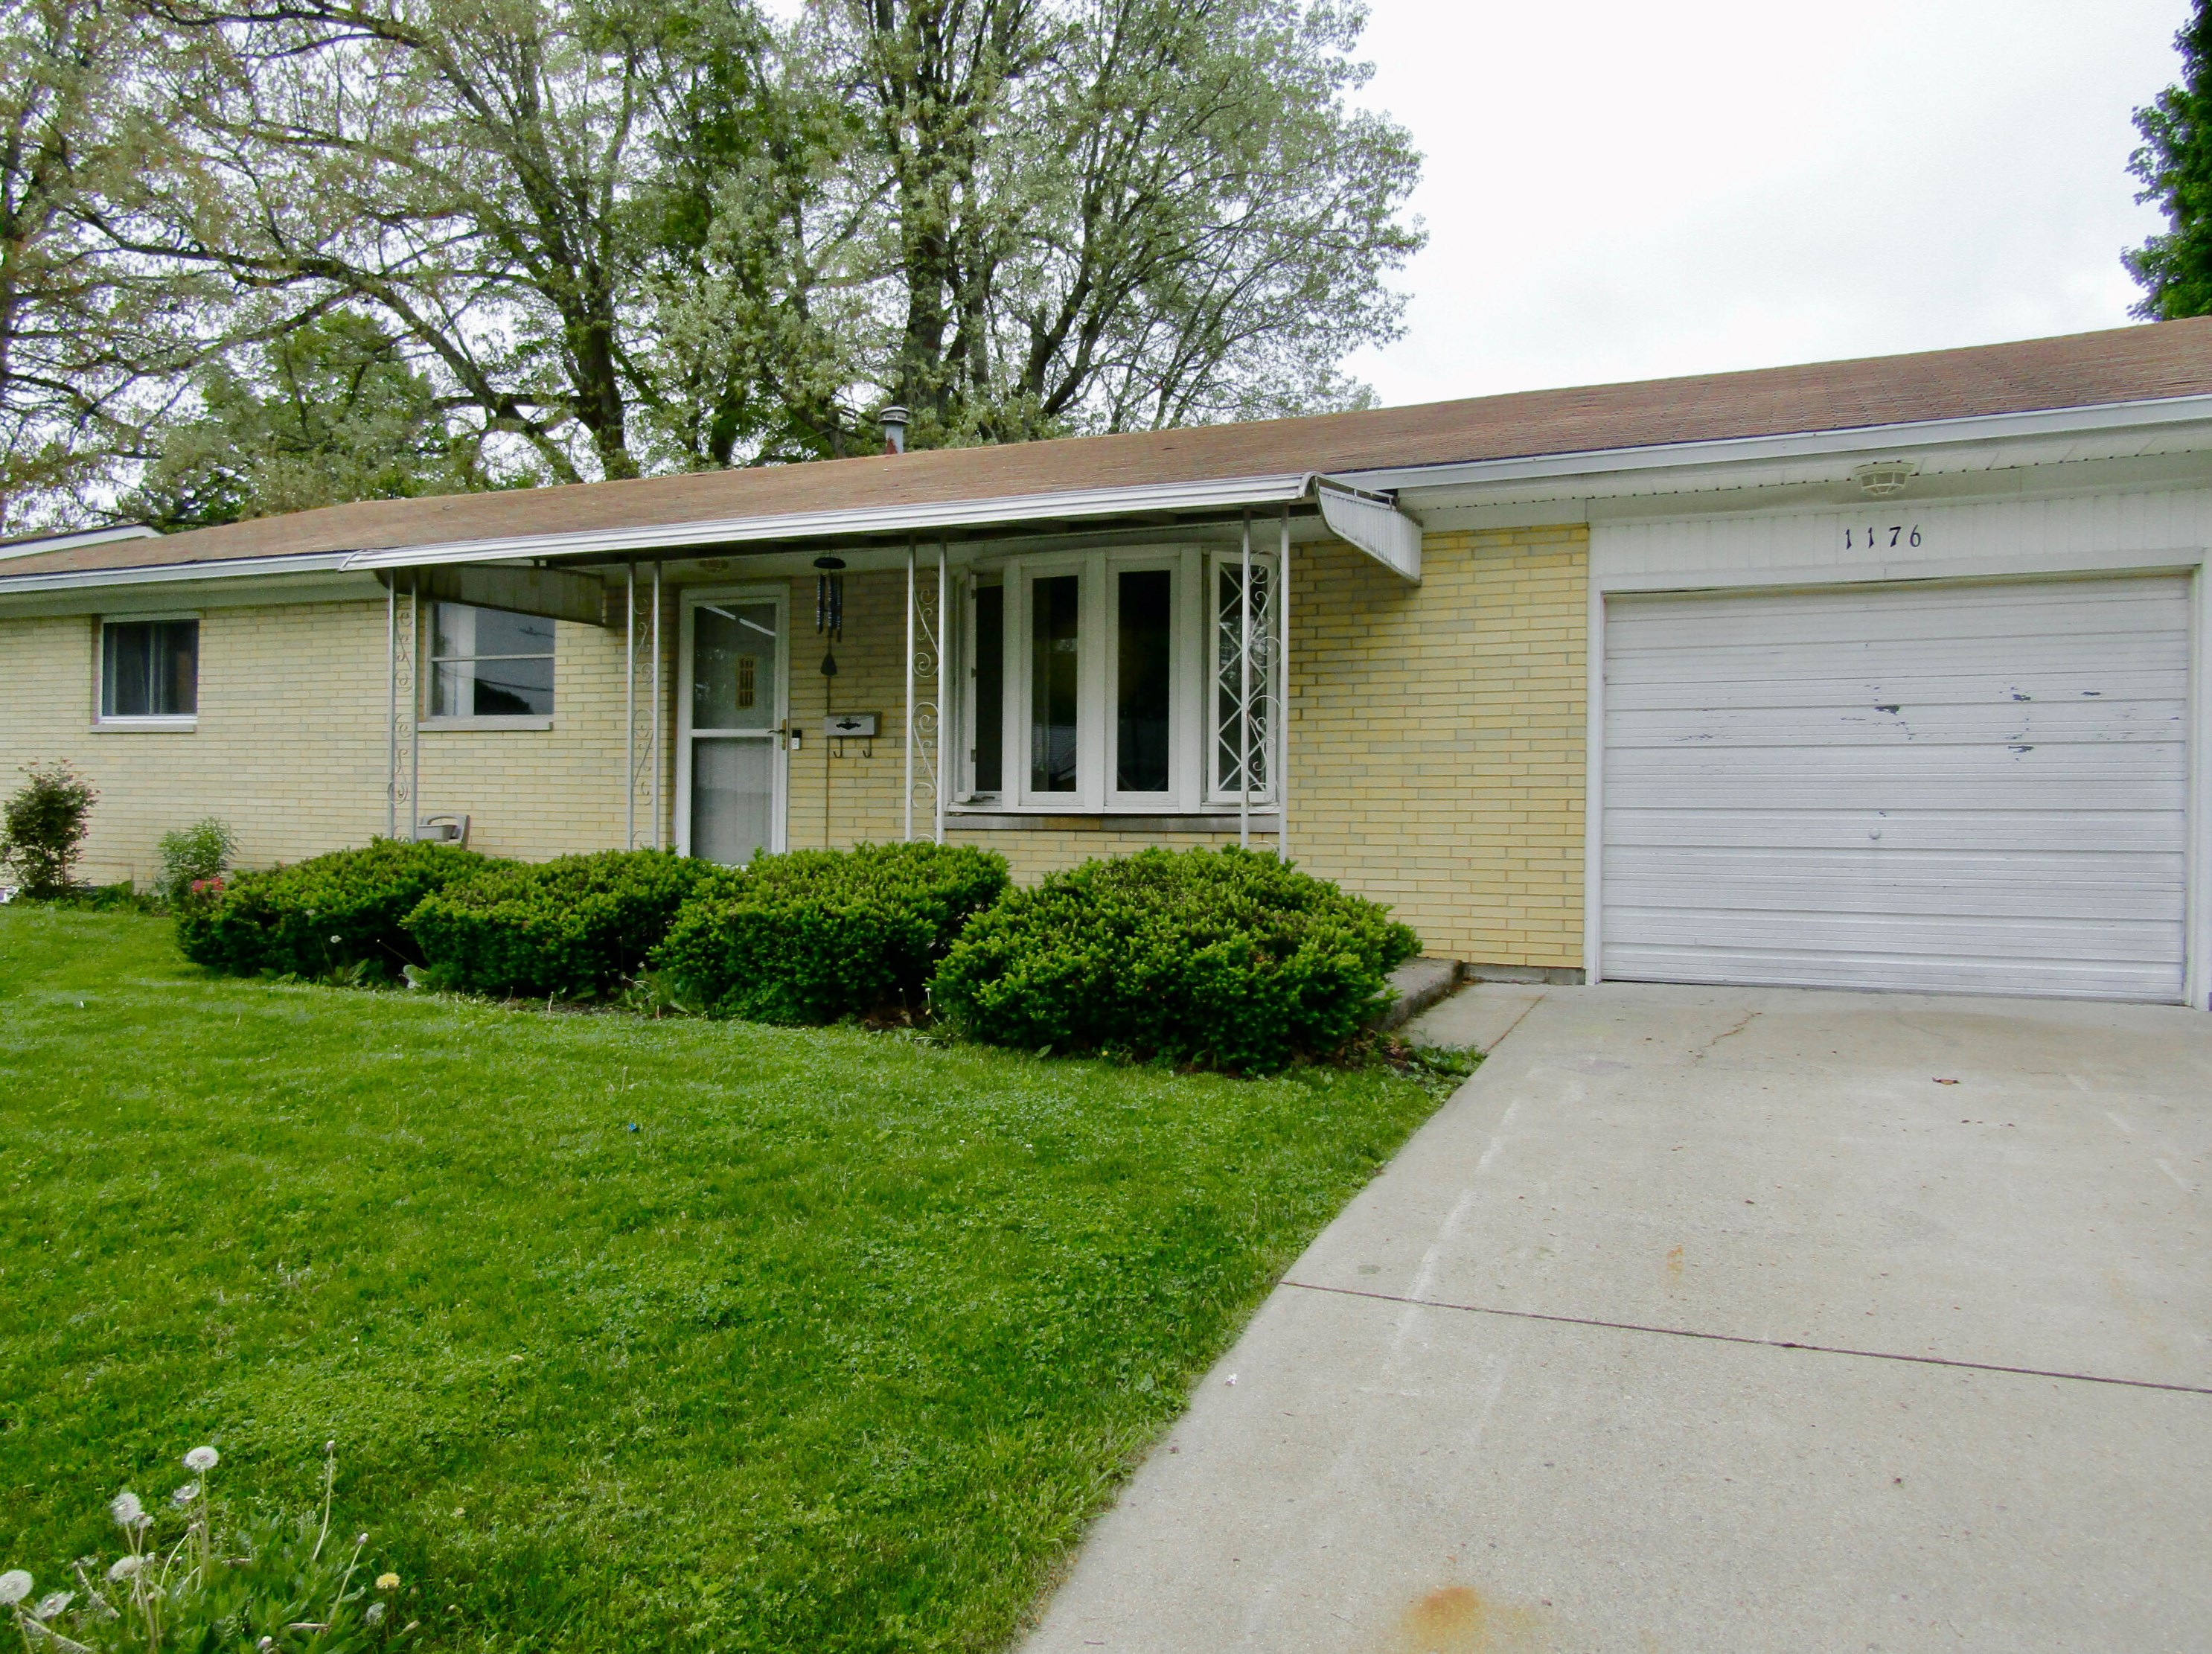 1176 Erie St, Bellefontaine, OH 43311